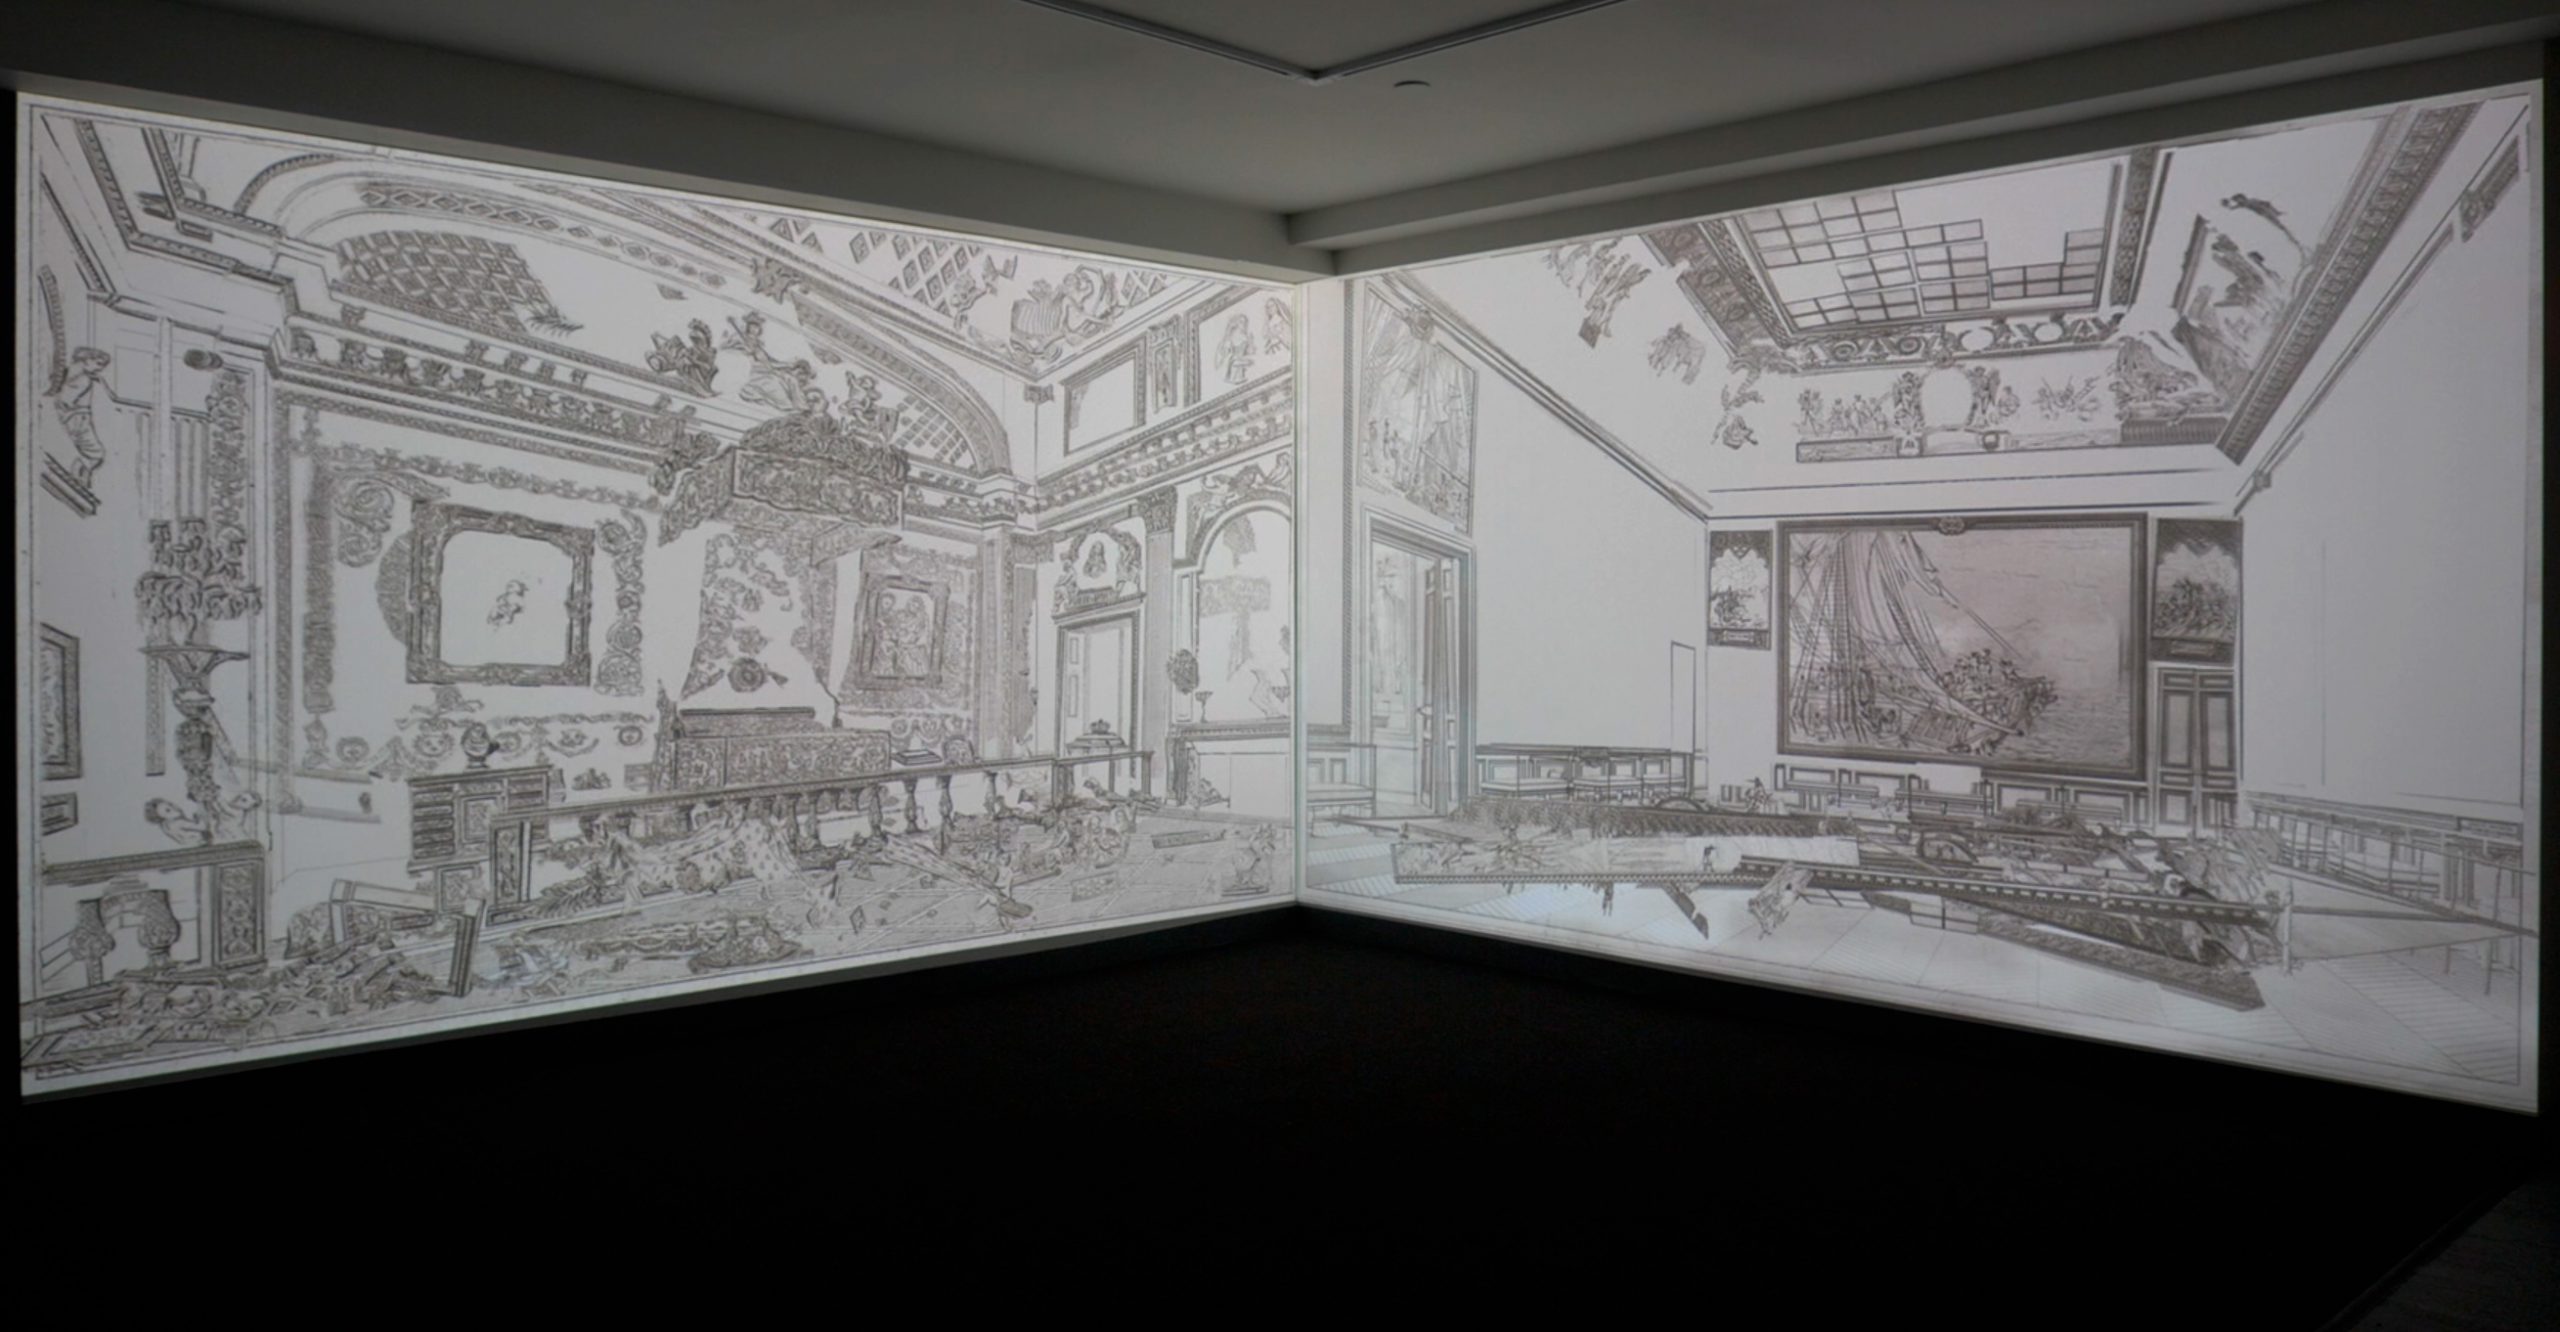 Dana Levy, The Weight of Things, 2015-2019, 2 channel video installation, 2:50 min. Installation view Fridman Gallery (New York, 2019)